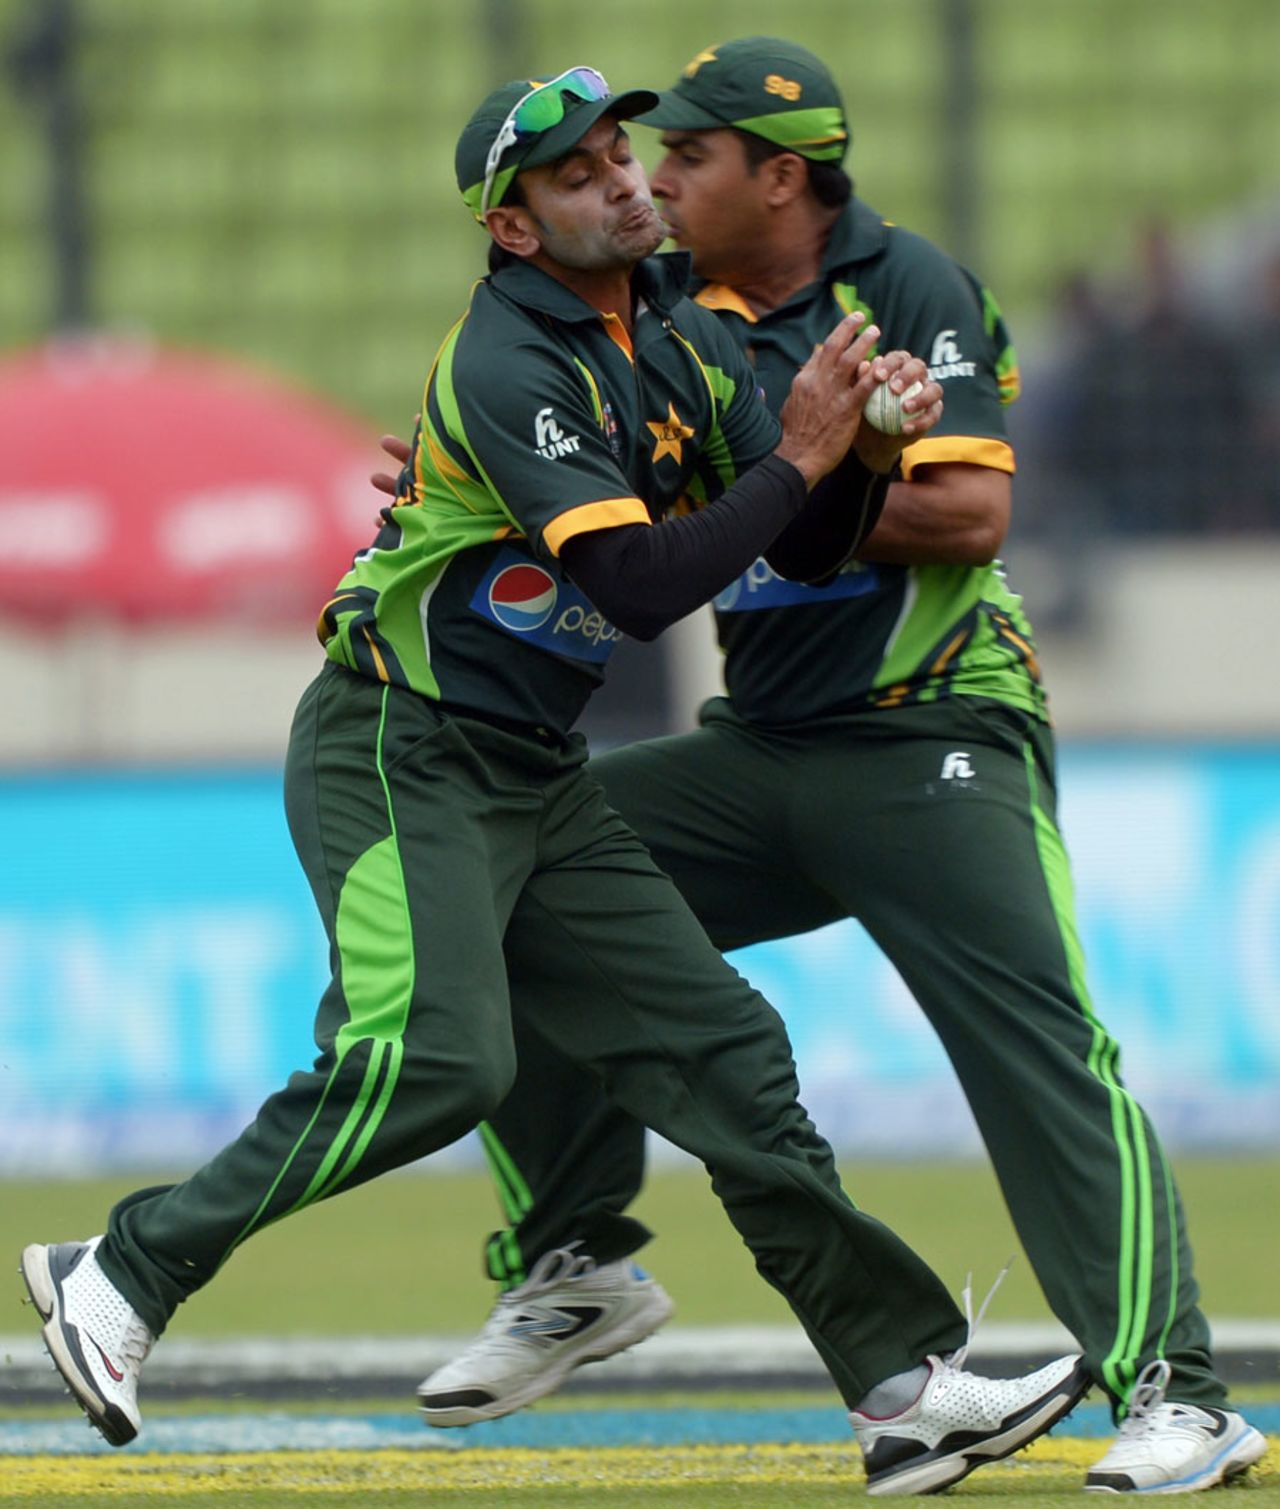 Mohammad Hafeez and Sharjeel Khan nearly collided while attempting a catch, India v Pakistan, Asia Cup, Mirpur, March 2, 2014